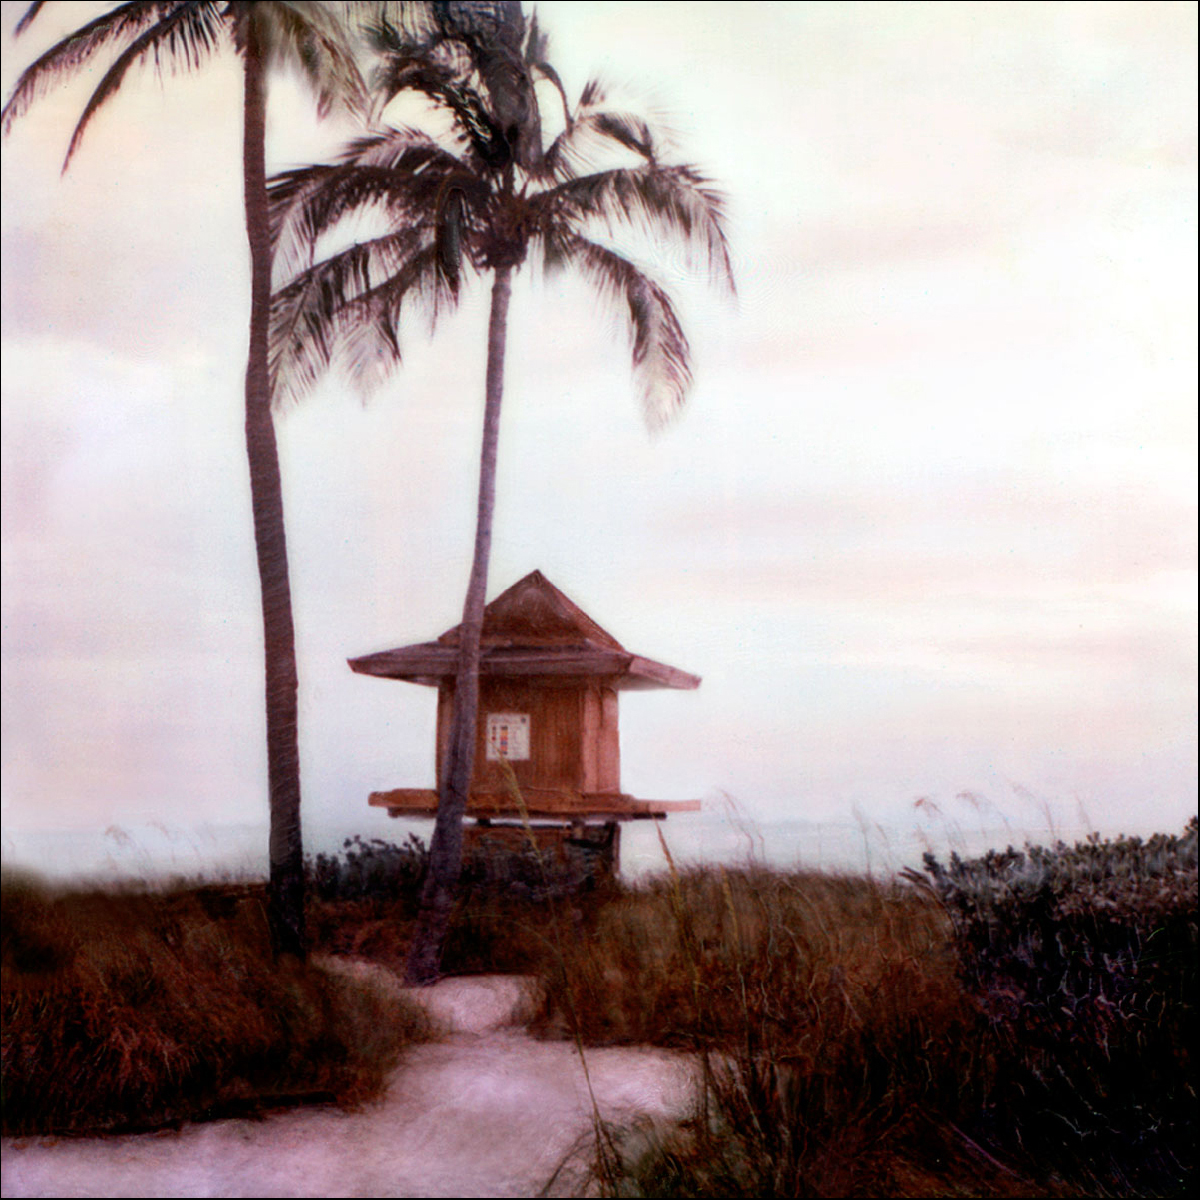 "Path to Lifeguard House"<br> Palms and Dunes,
Hollywood Beach, FL